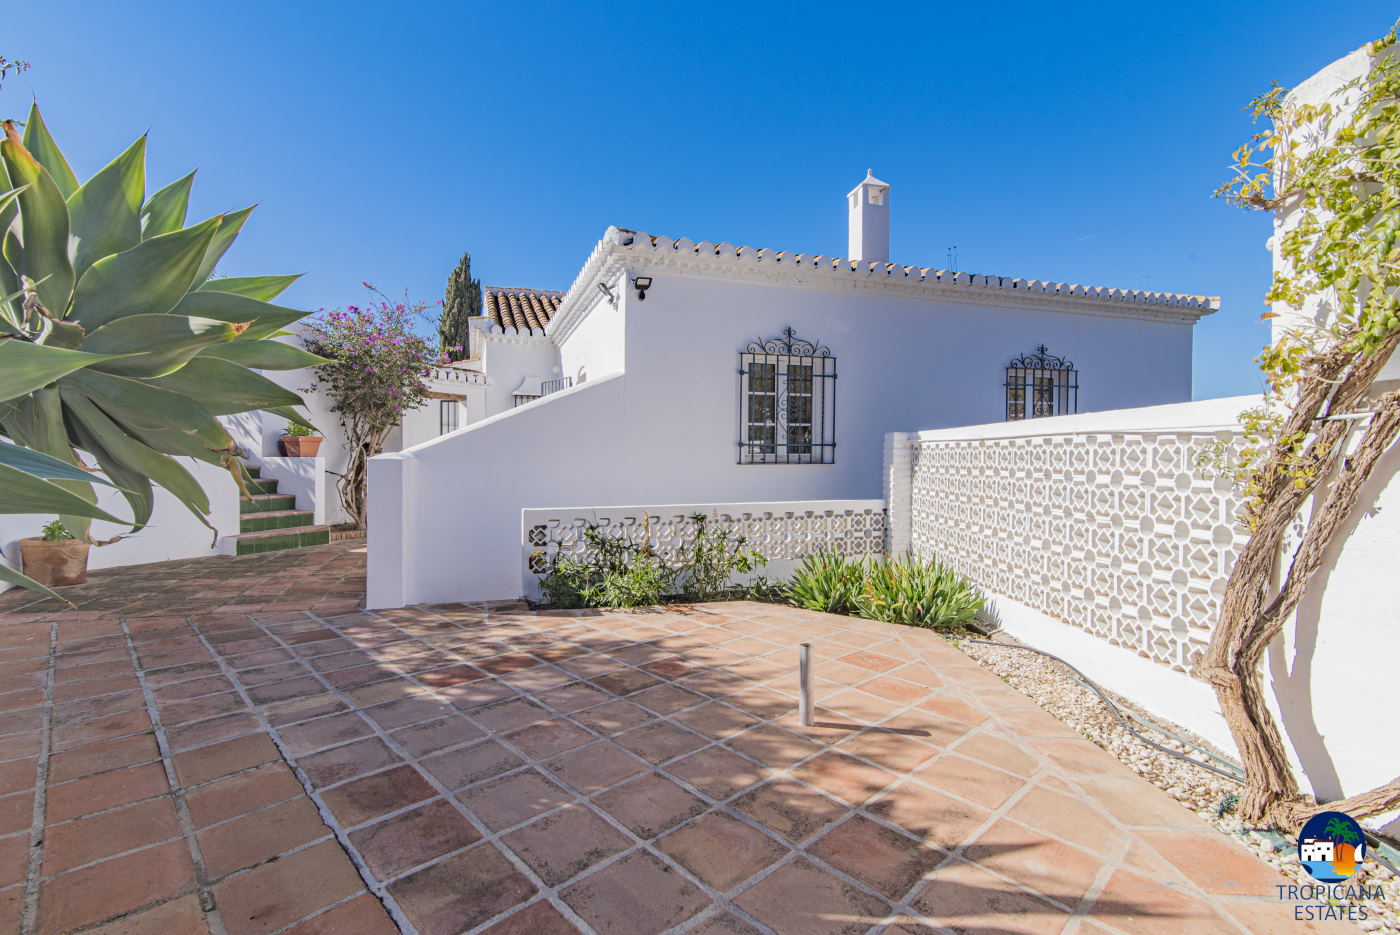 VILLA WITH GUEST APARTMENT AND SWIMMING POOL